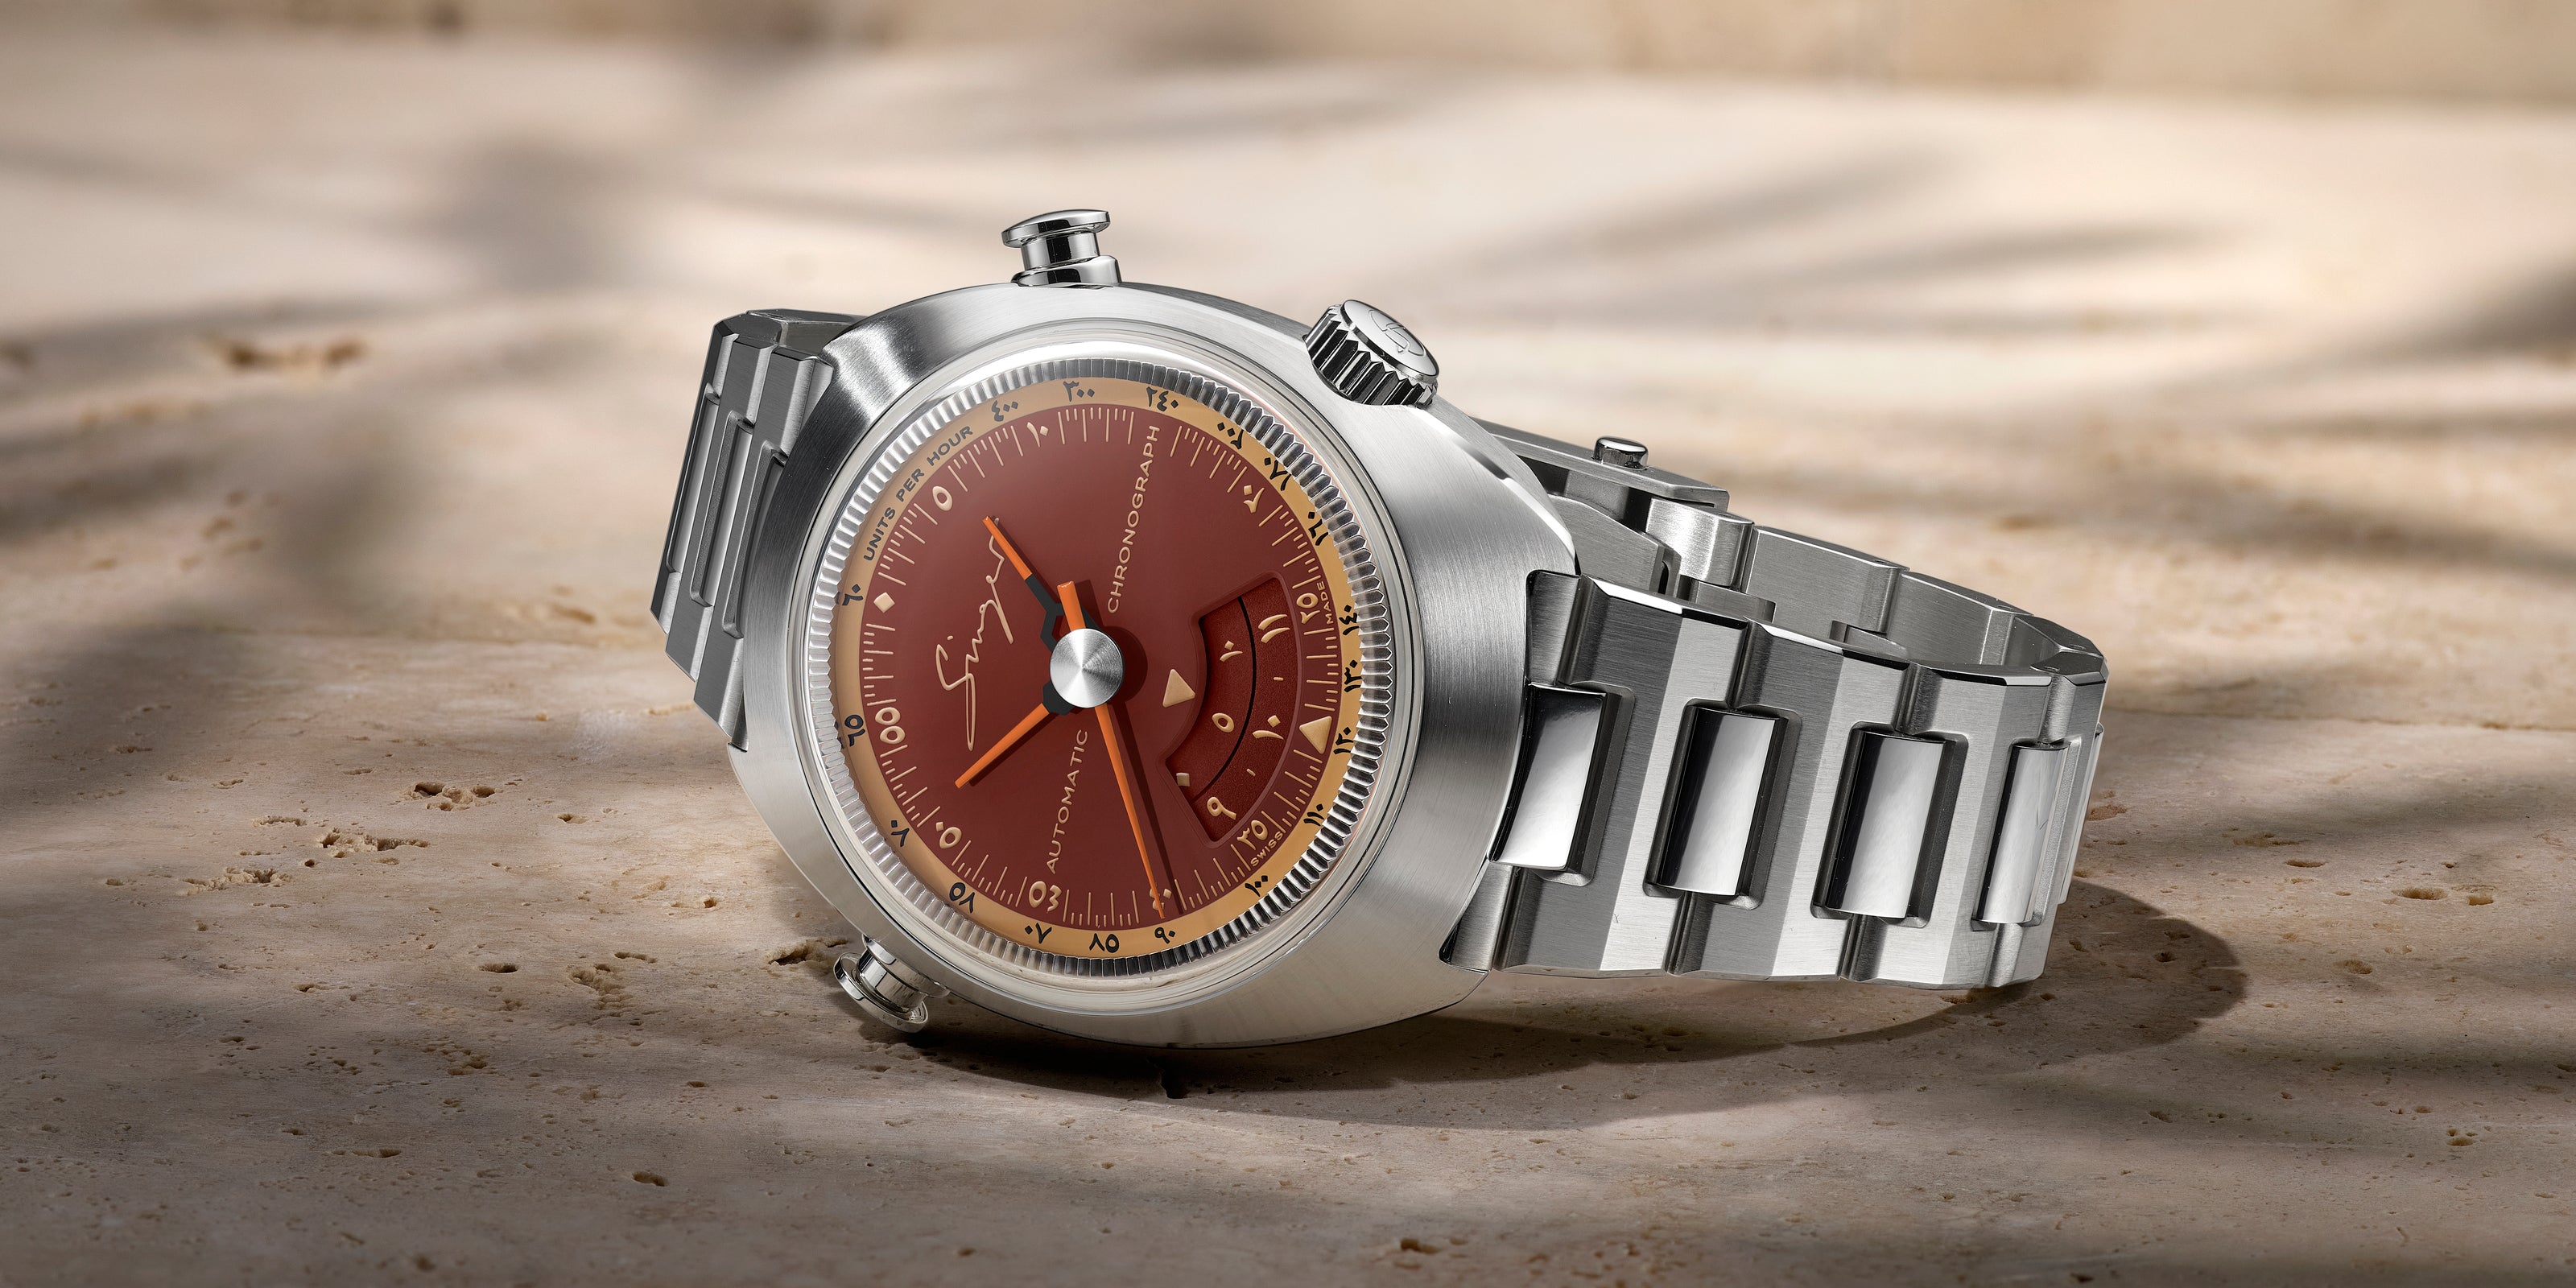 IN COLLABORATION WITH SINGER REIMAGINED, PERPÉTUEL PROUDLY PRESENTS THE 1969 CHRONOGRAPH PERPÉTUEL EDITION